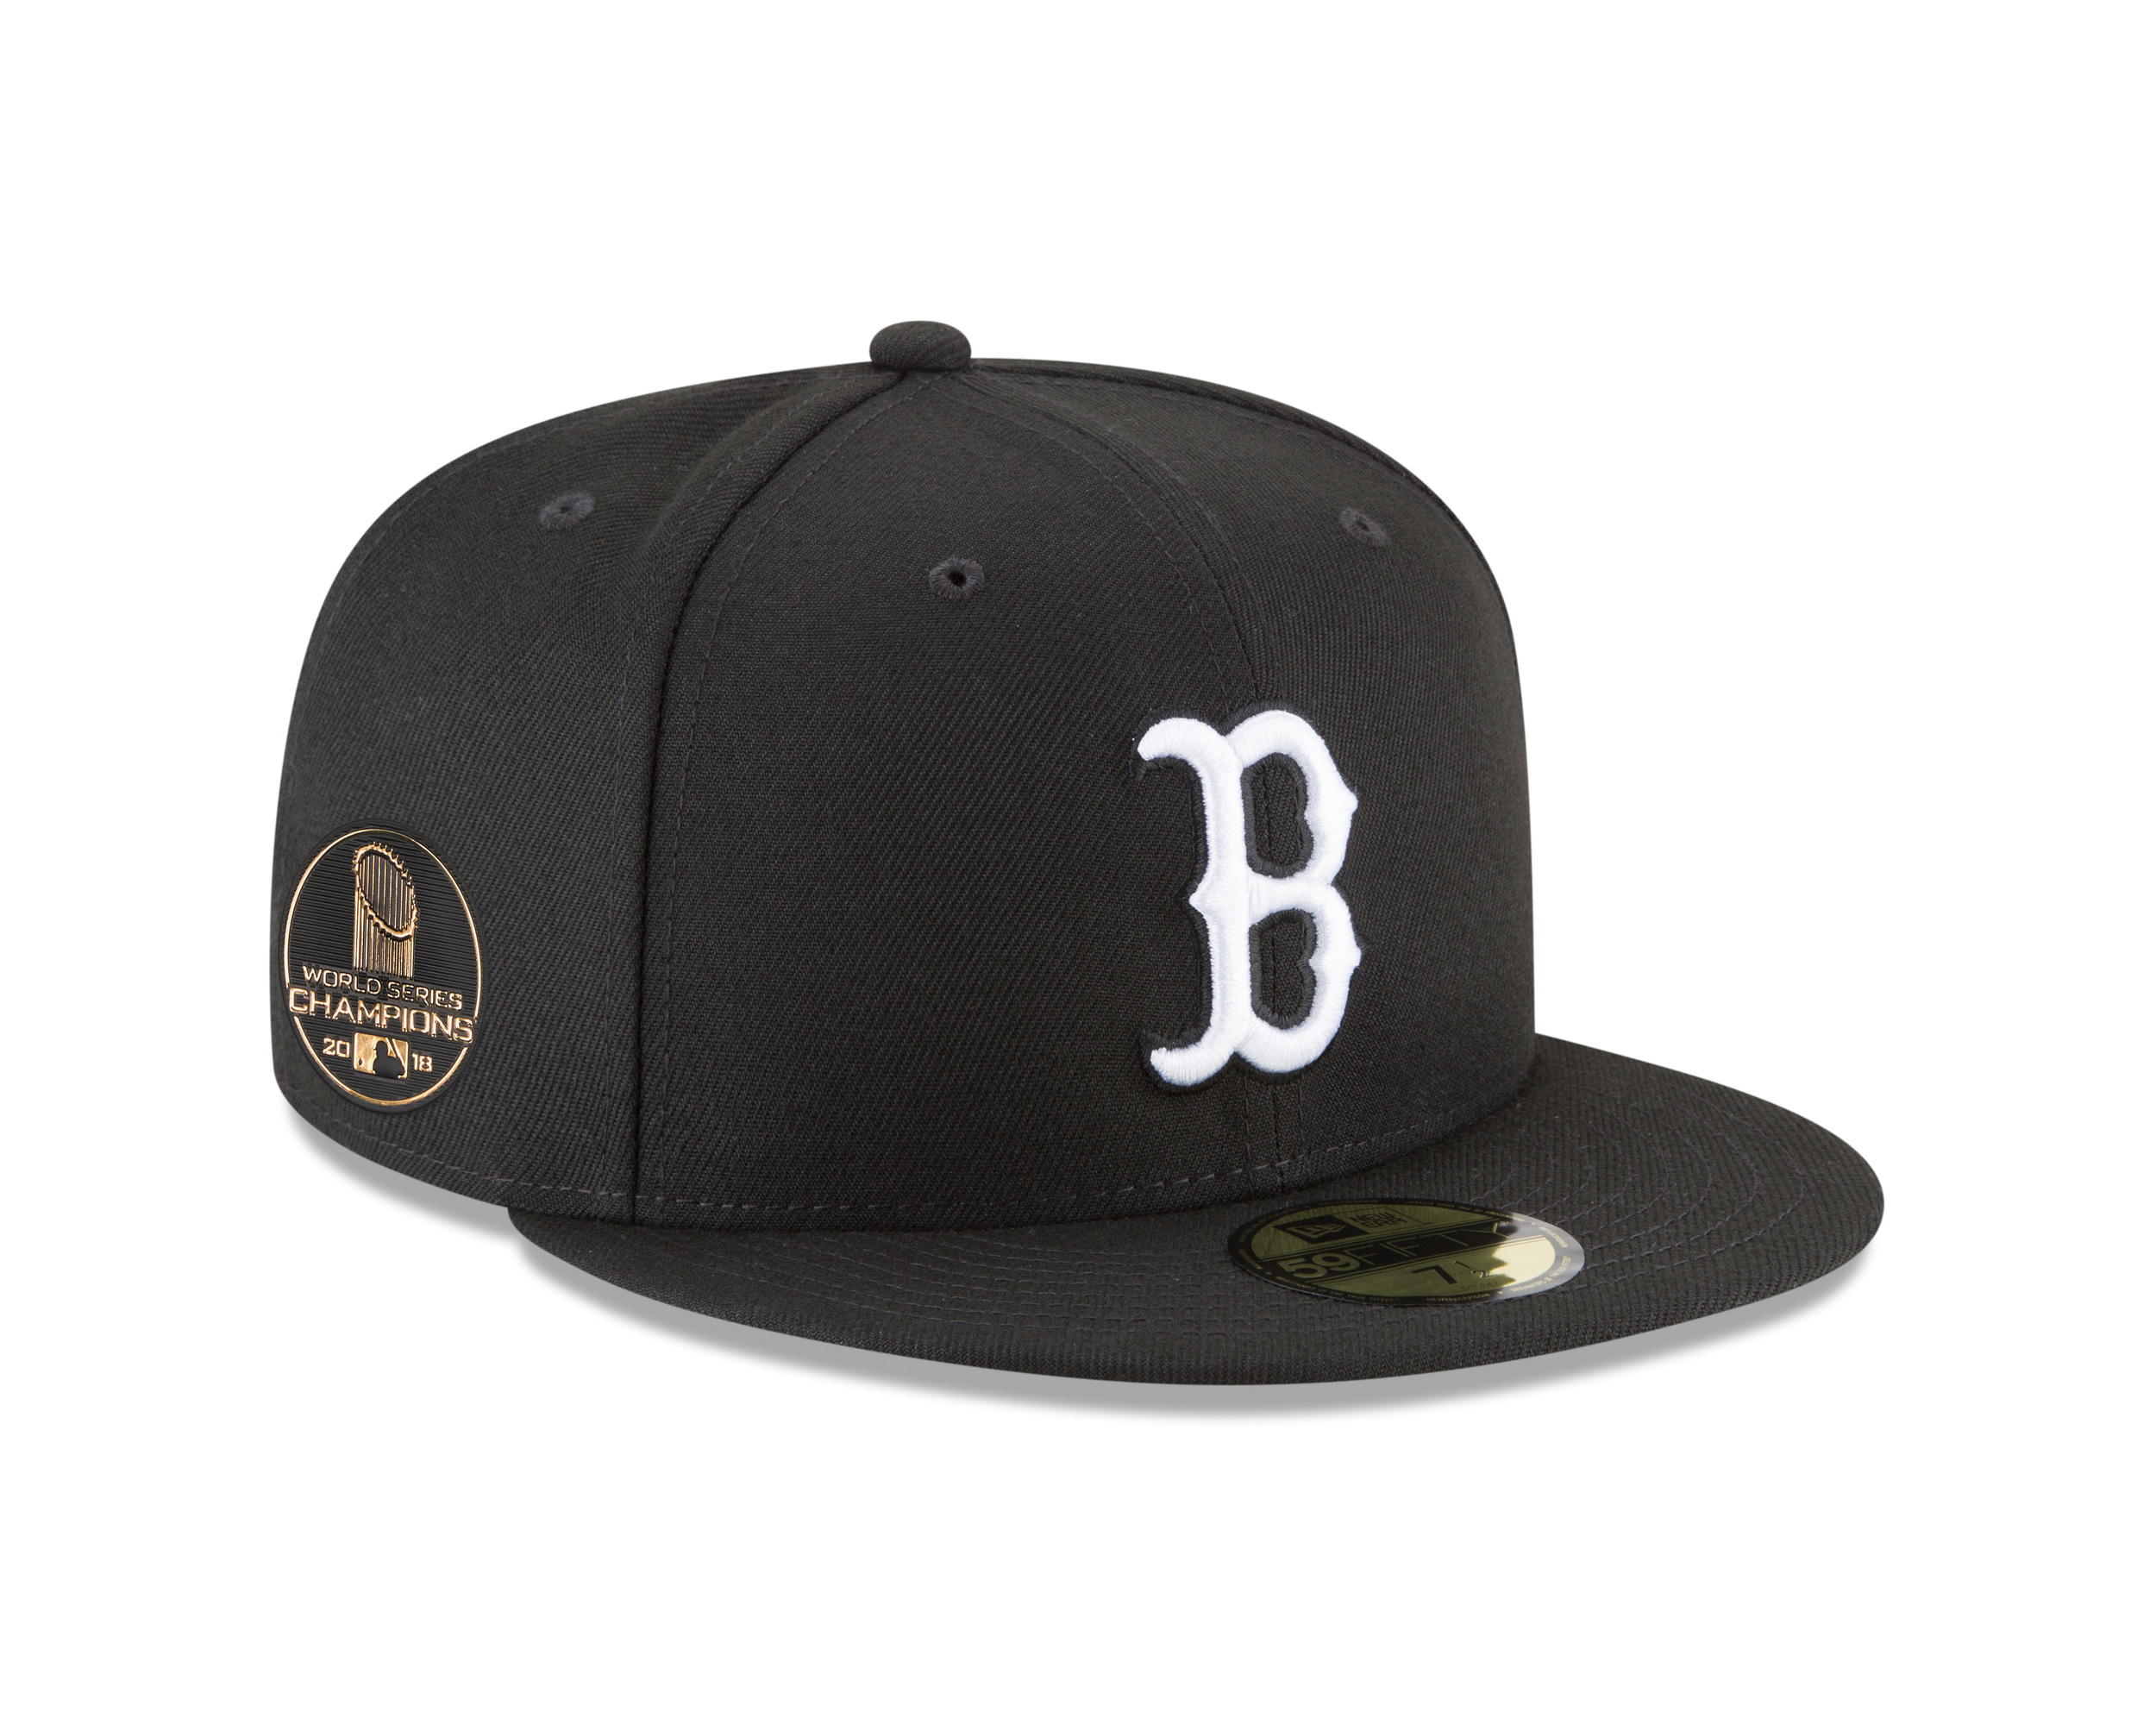 New Era Cap Drops Red Sox World Series Champion Collection with 